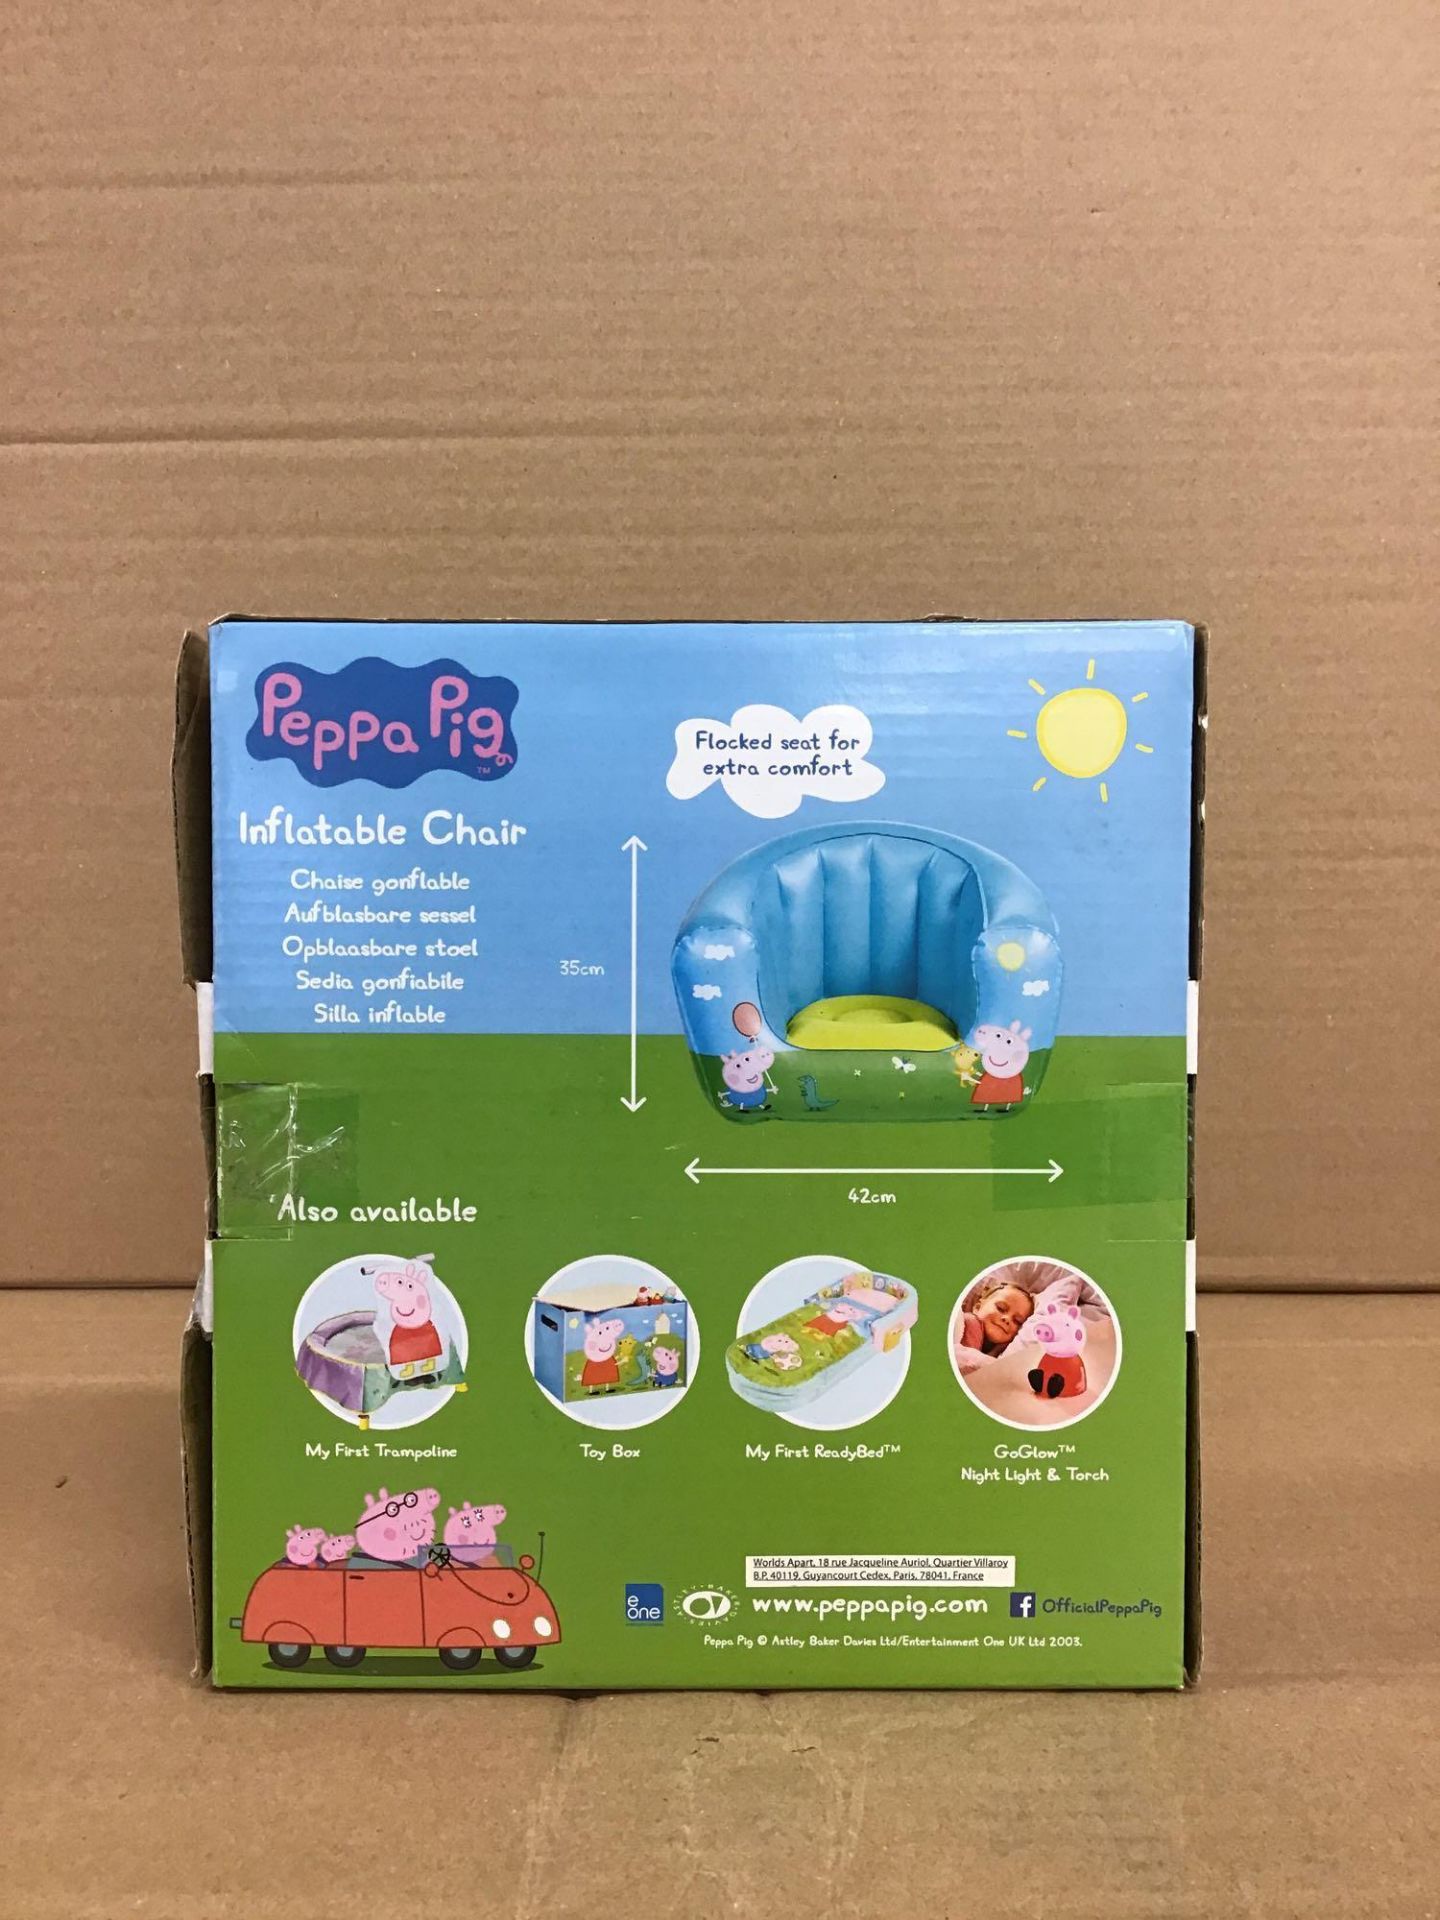 Peppa Pig Flocked Chair/Inflatable Toys (274/4924) - £11.00 RRP - Image 3 of 5